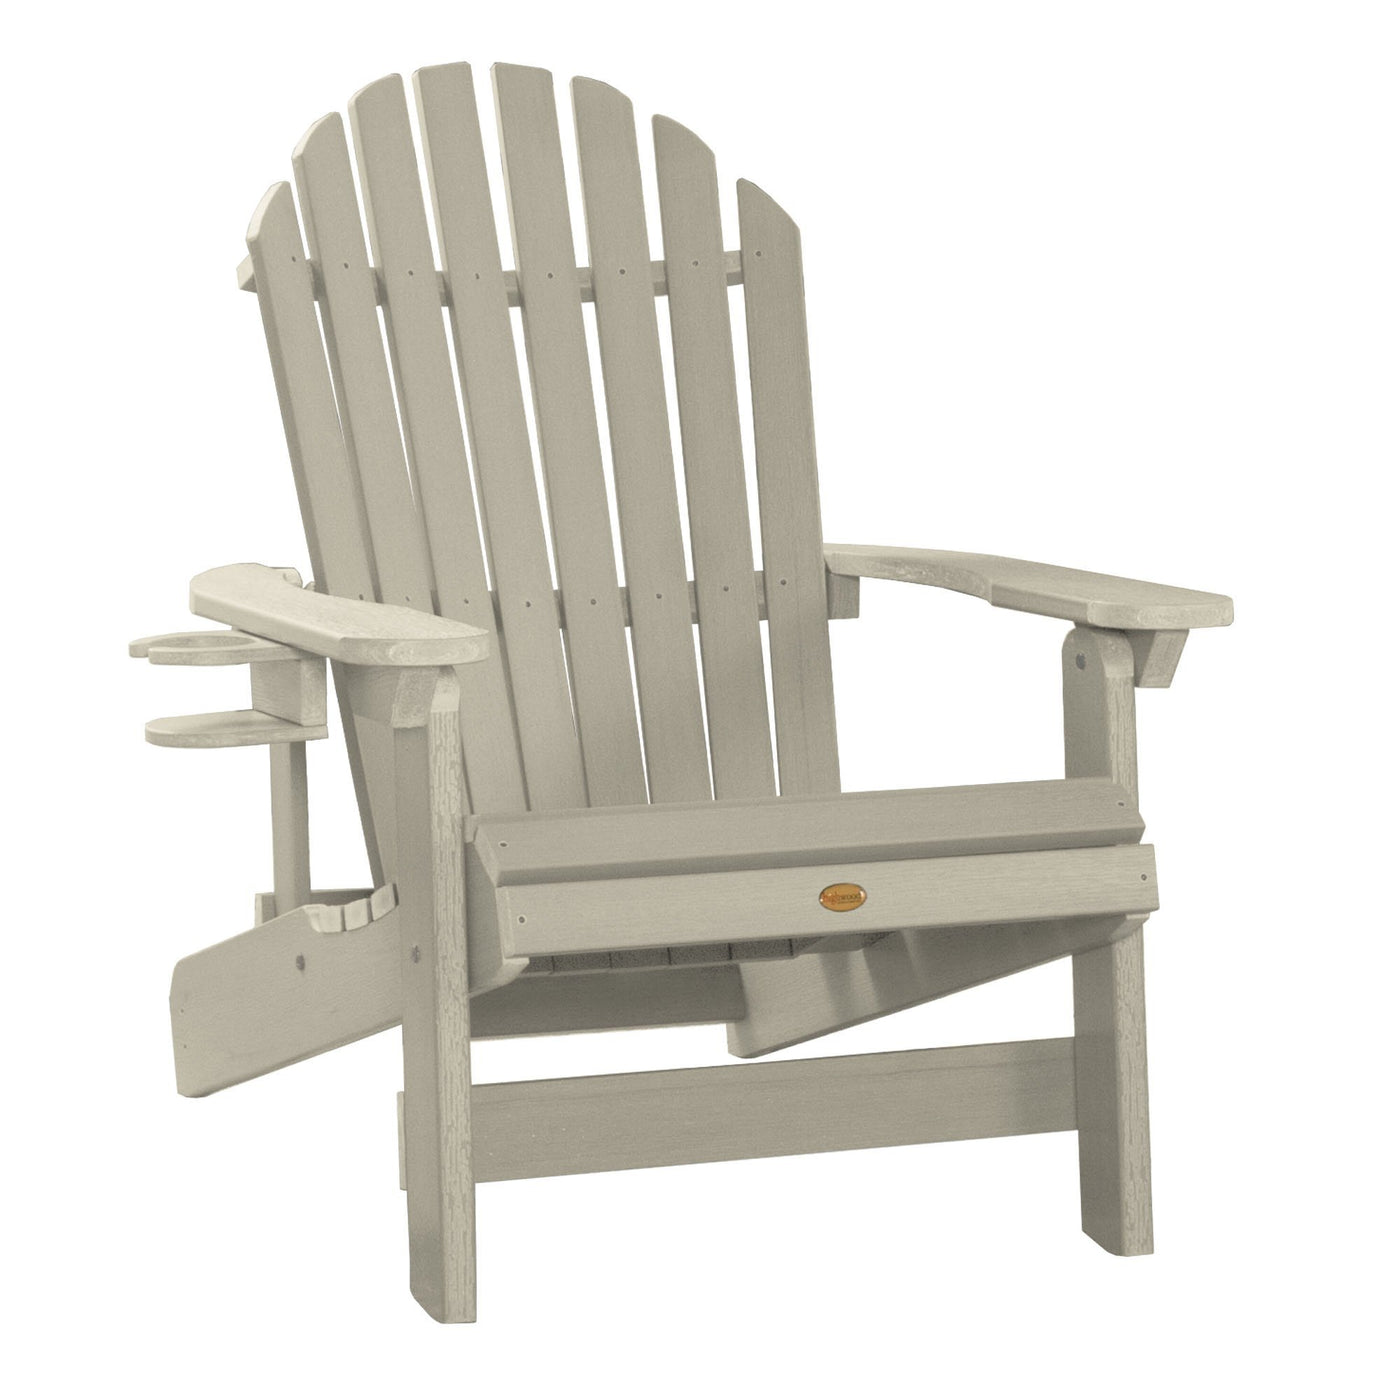 1 King Hamilton Folding and Reclining Adirondack Chair with 1 Easy-add Cup Holder Highwood USA Whitewash 